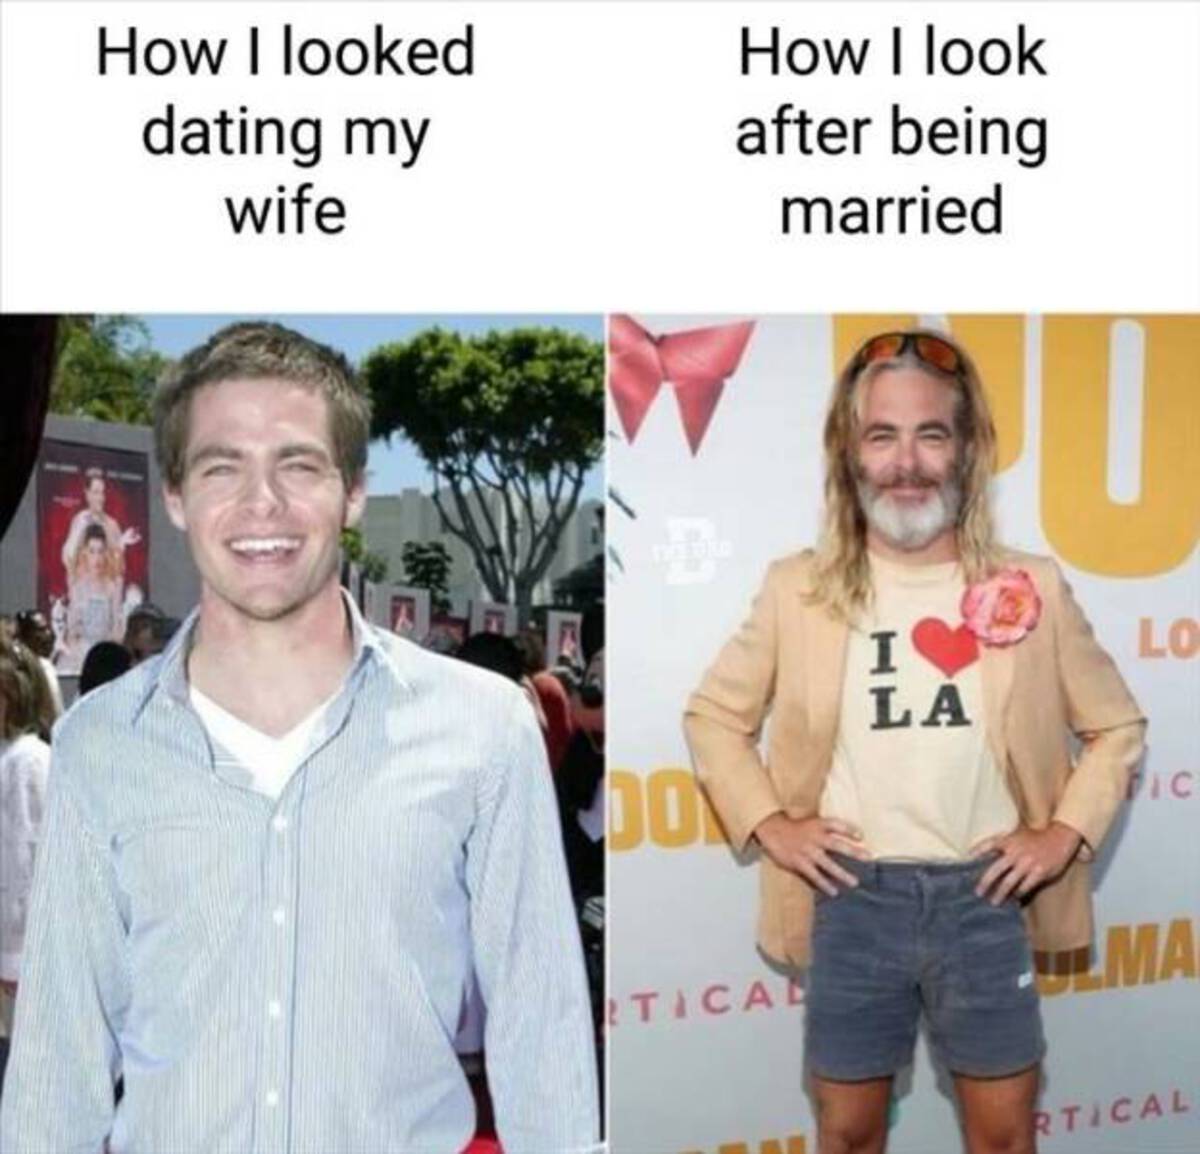 chris pine poolman premier - How I looked dating my wife How I look after being married 00 I La Lo Fic Tical Ma Rtical